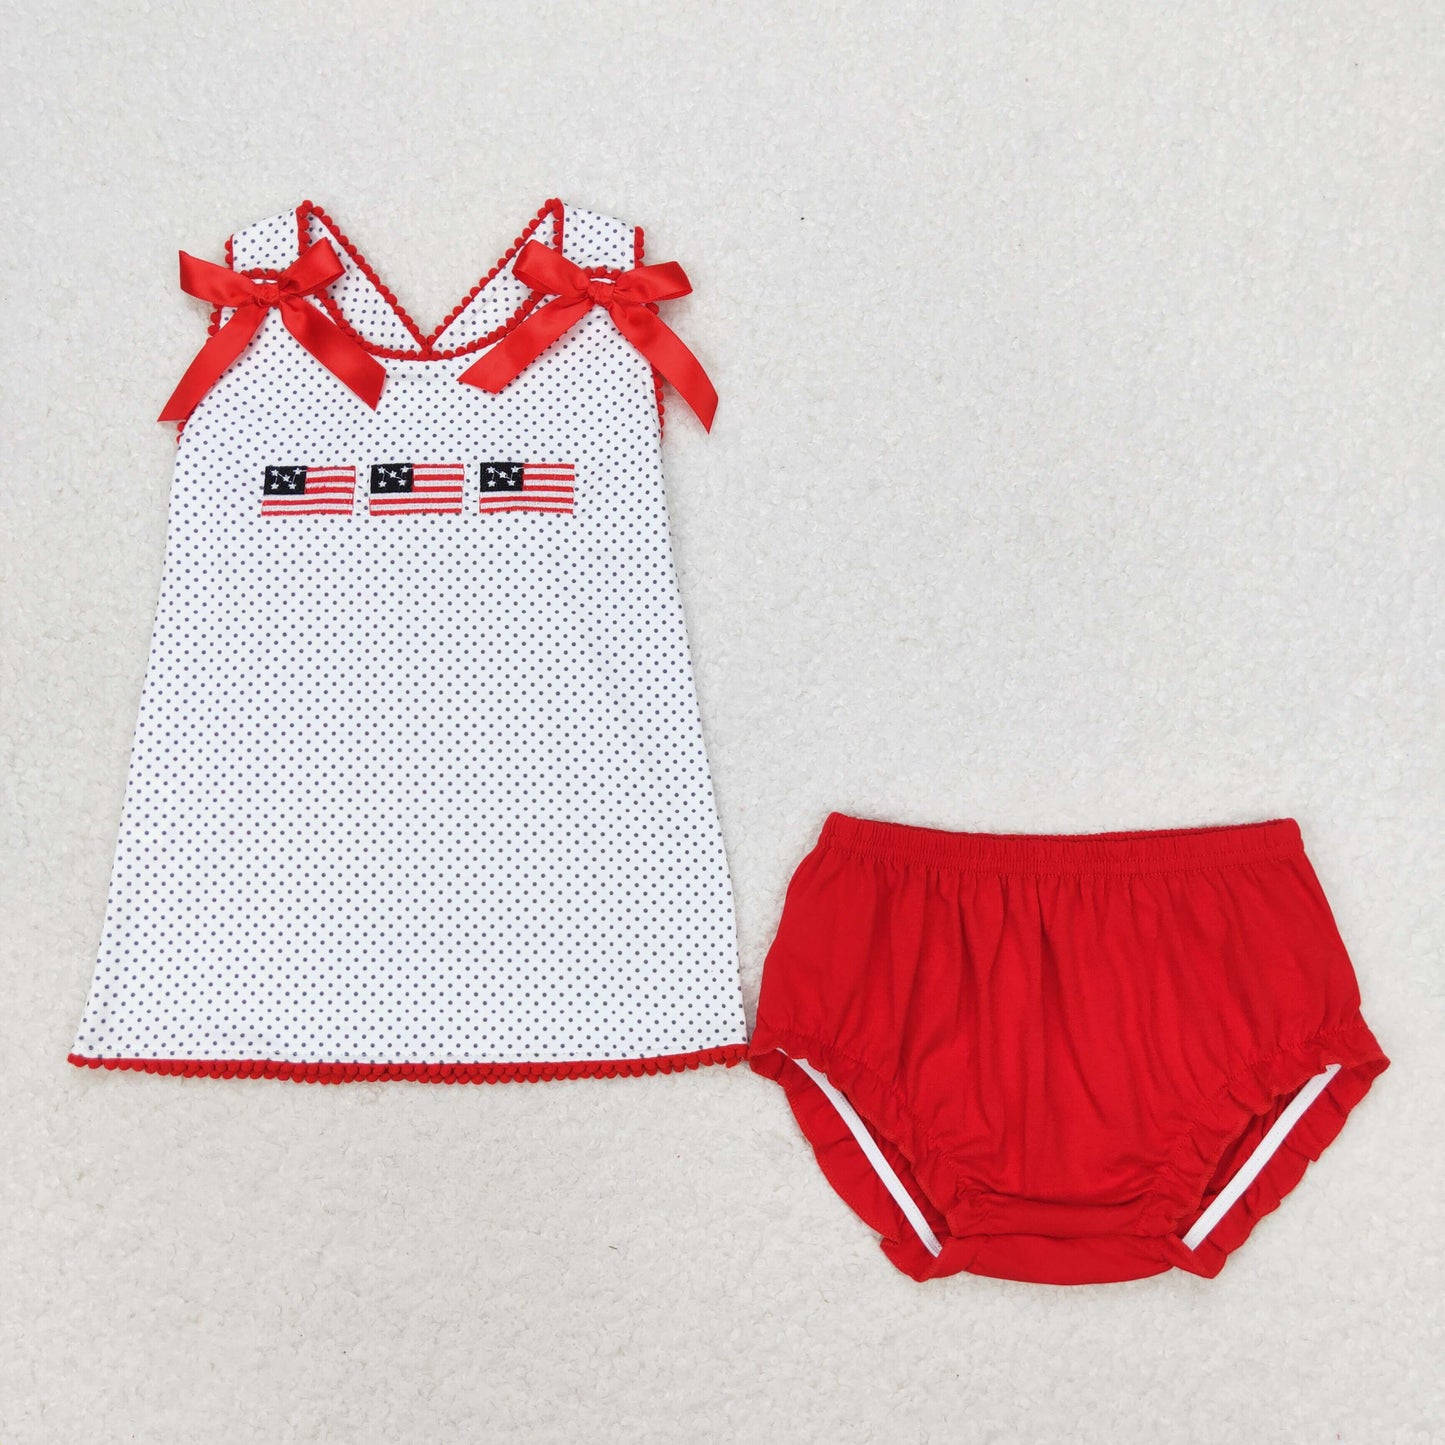 rts no moq GT0599+SS0267 Embroidered Flag Polka Dot White Sleeveless Top Red Lace Briefs sets